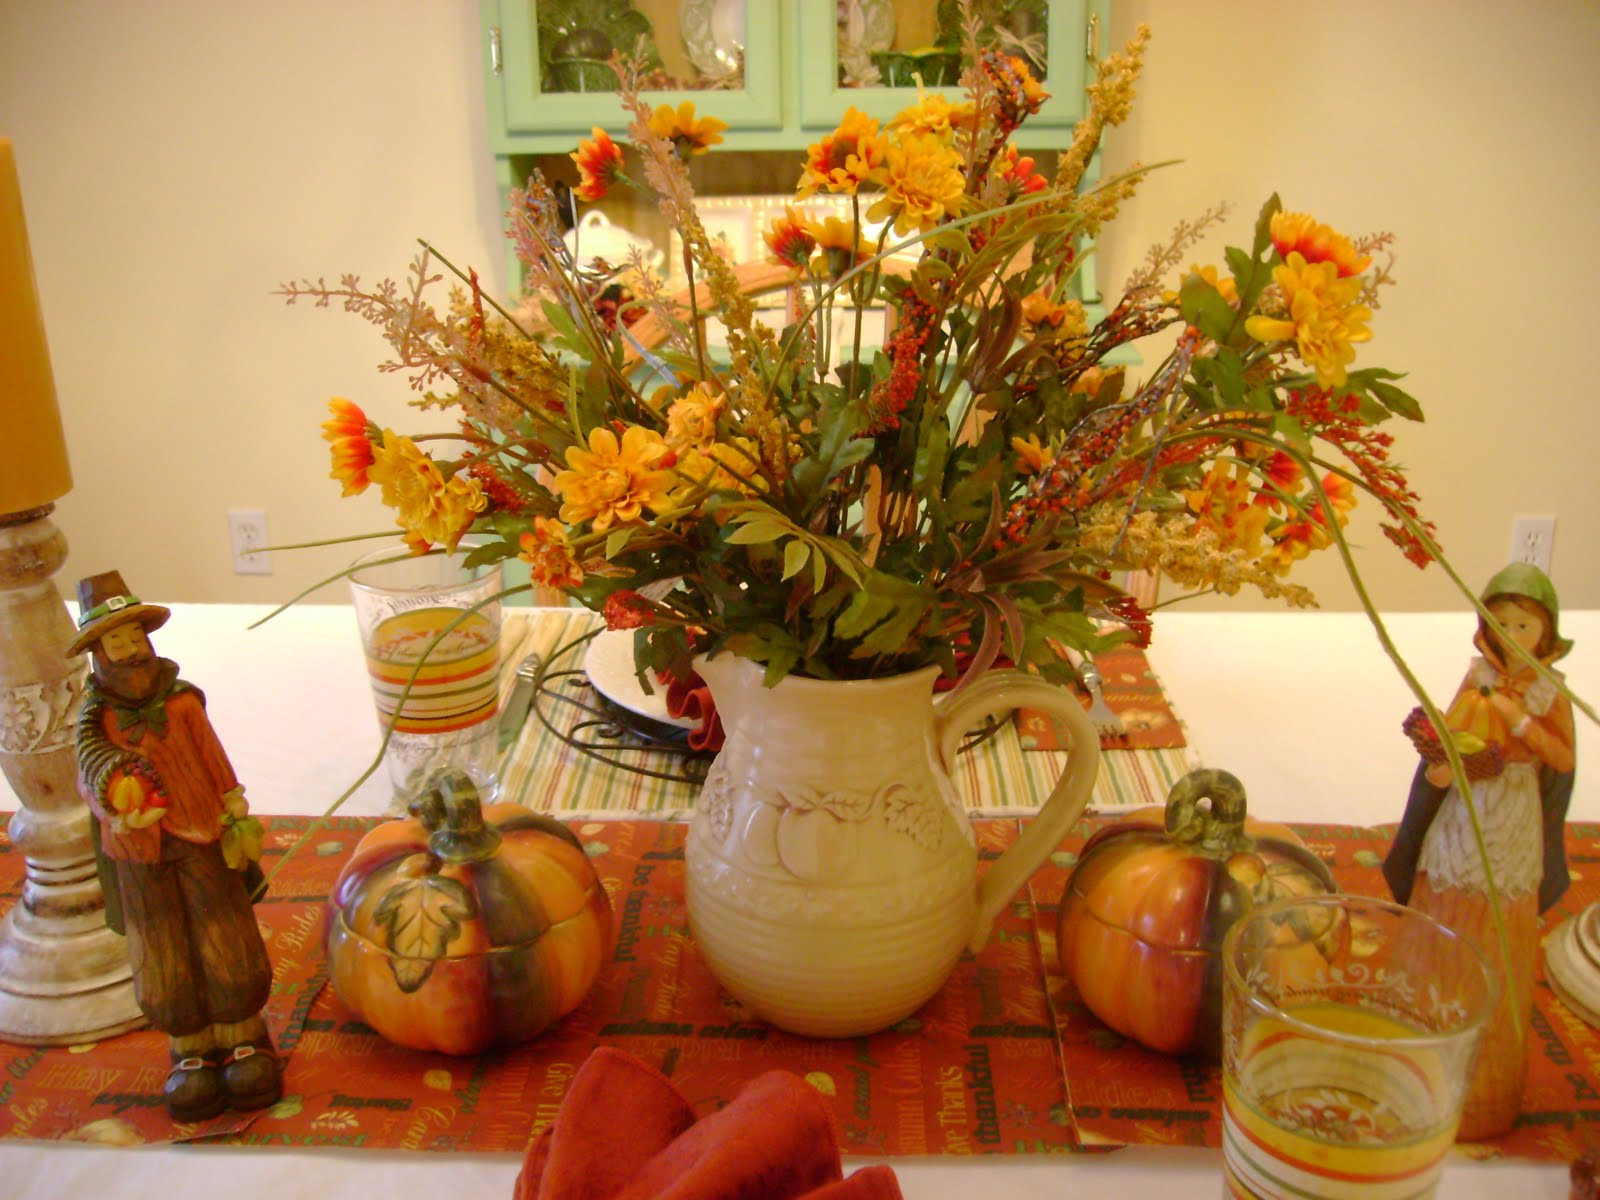 Table Decorations For Thanksgiving
 The Sunny Side of the Sun Porch My Thanksgiving Table